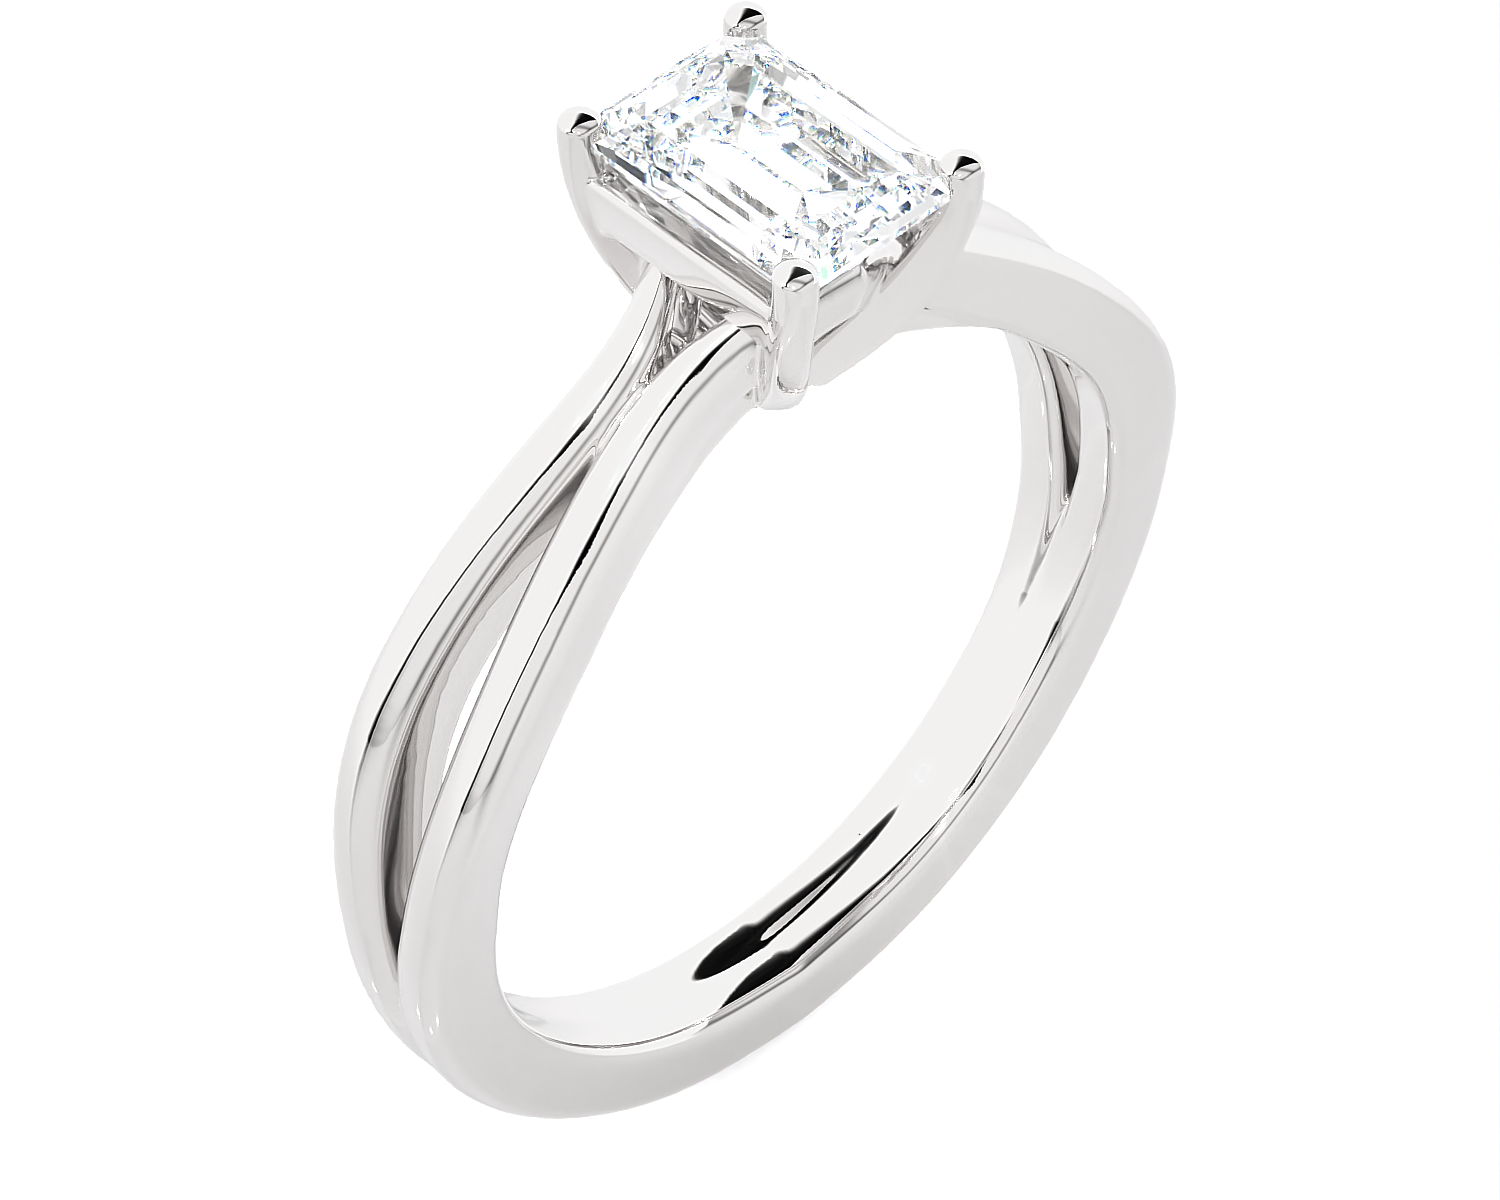 3/4 ctw Emerald-Cut Lab Grown Diamond Solitaire Engagement Ring